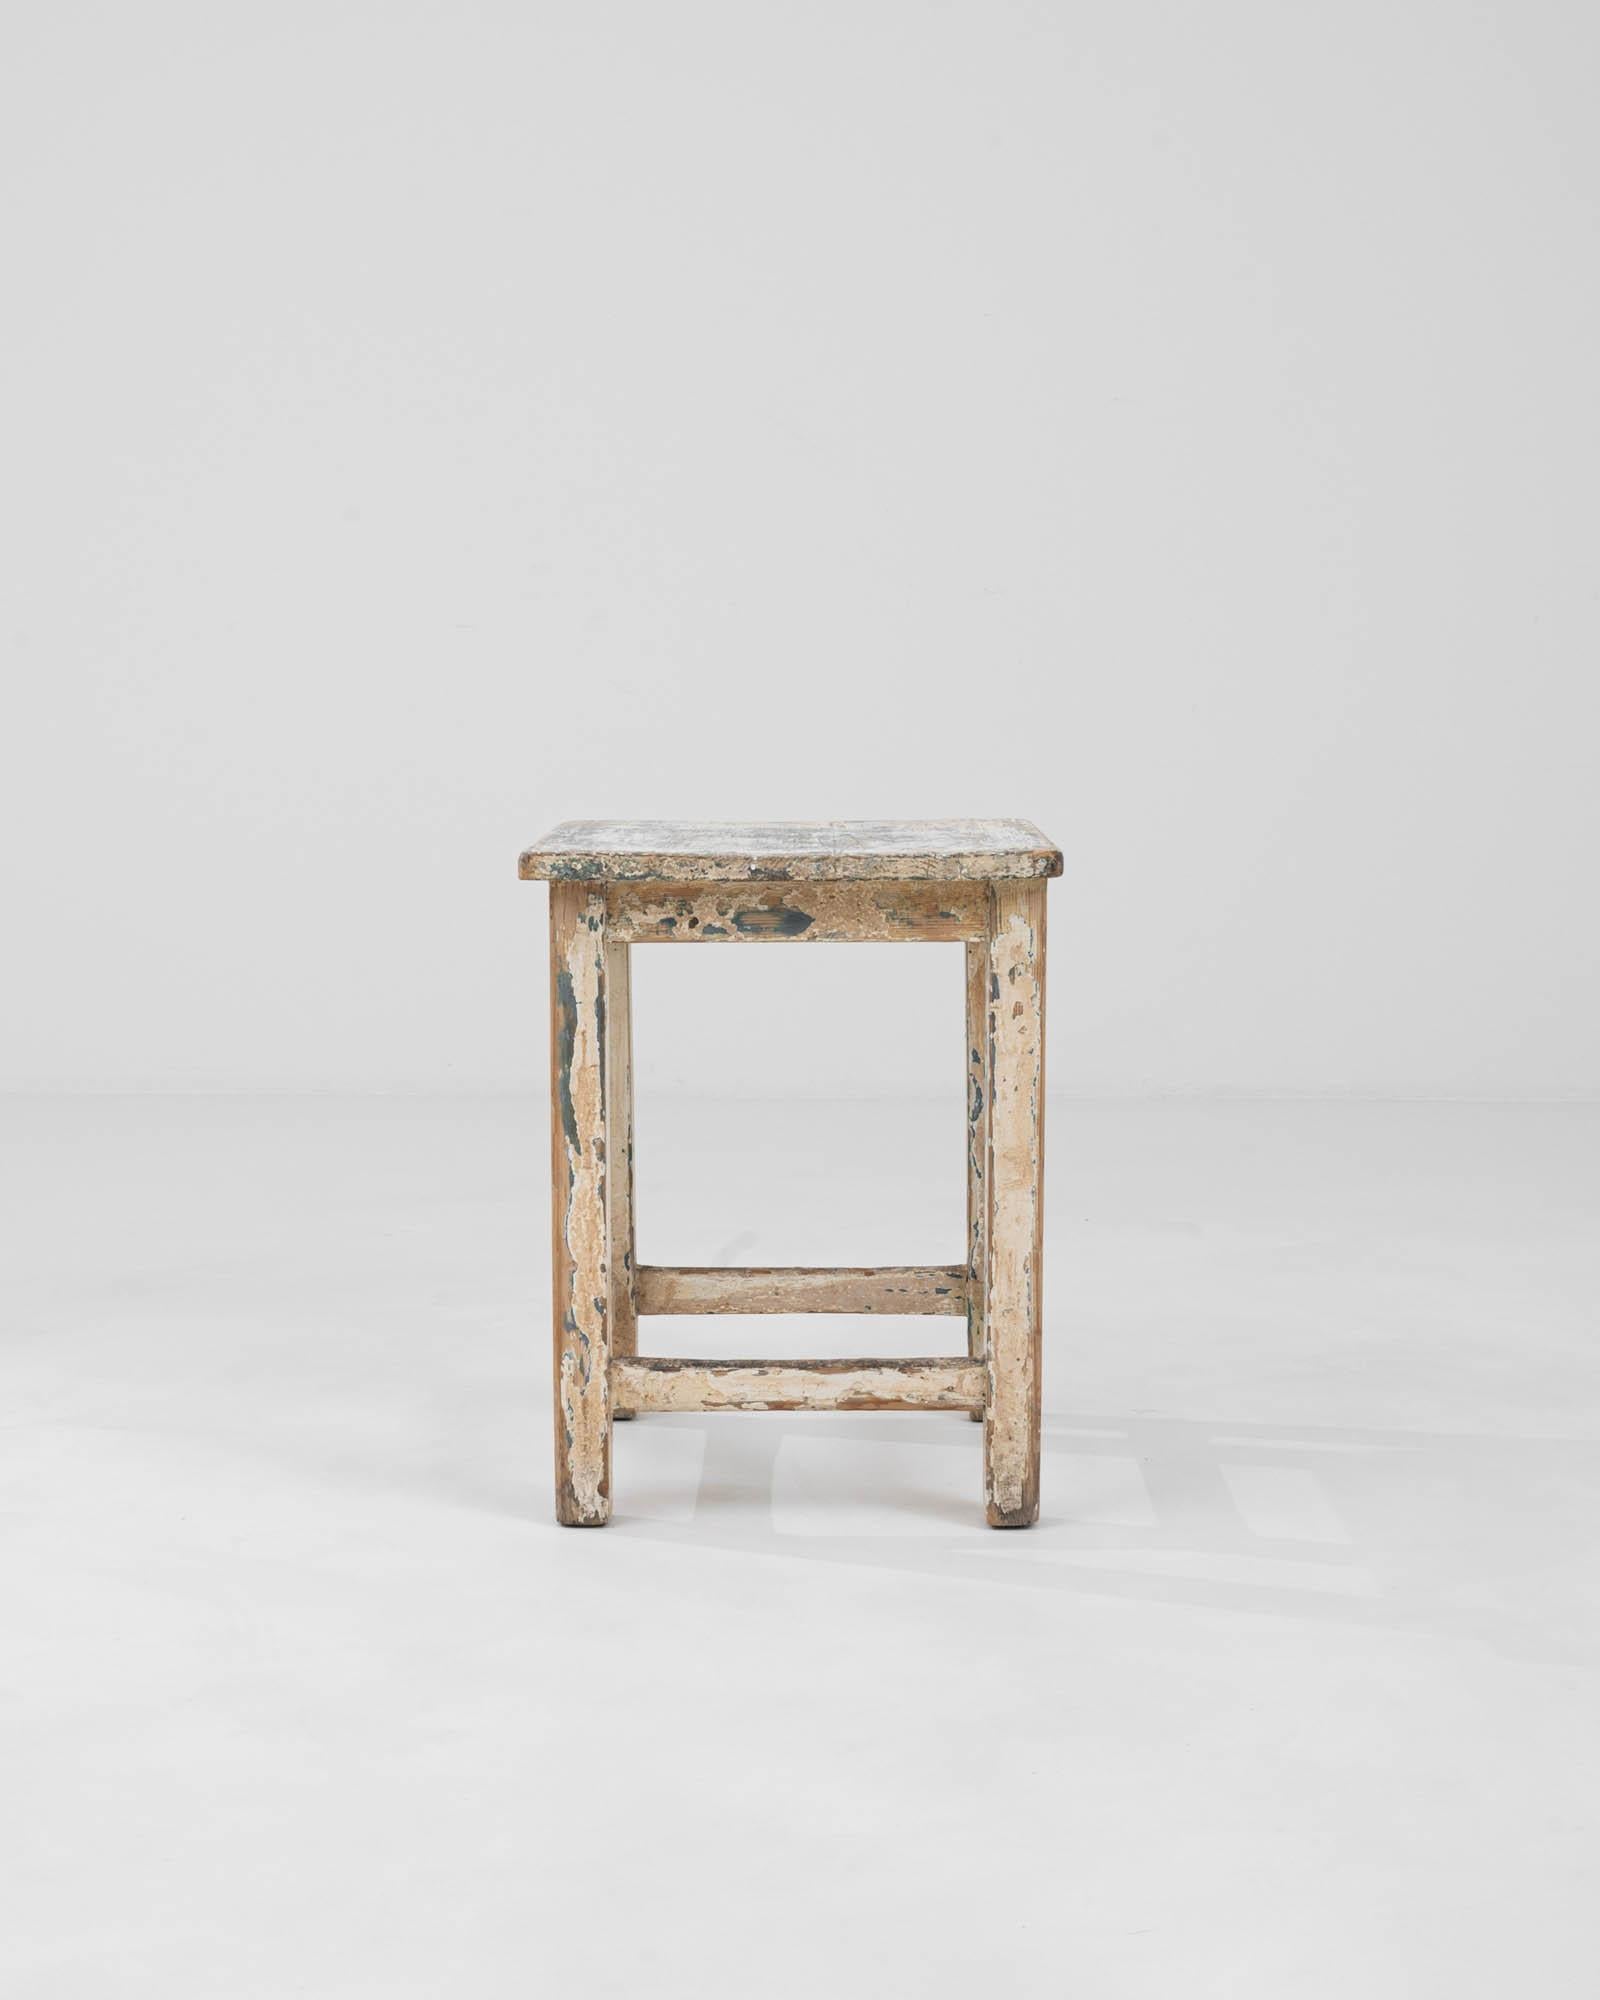 This Early 20th Century Central European stool is a testament to the timeless beauty of patinated wood, offering a sense of history and nostalgia. Its robust wooden frame, displaying layers of flaking paint in muted tones, tells a rich story of its